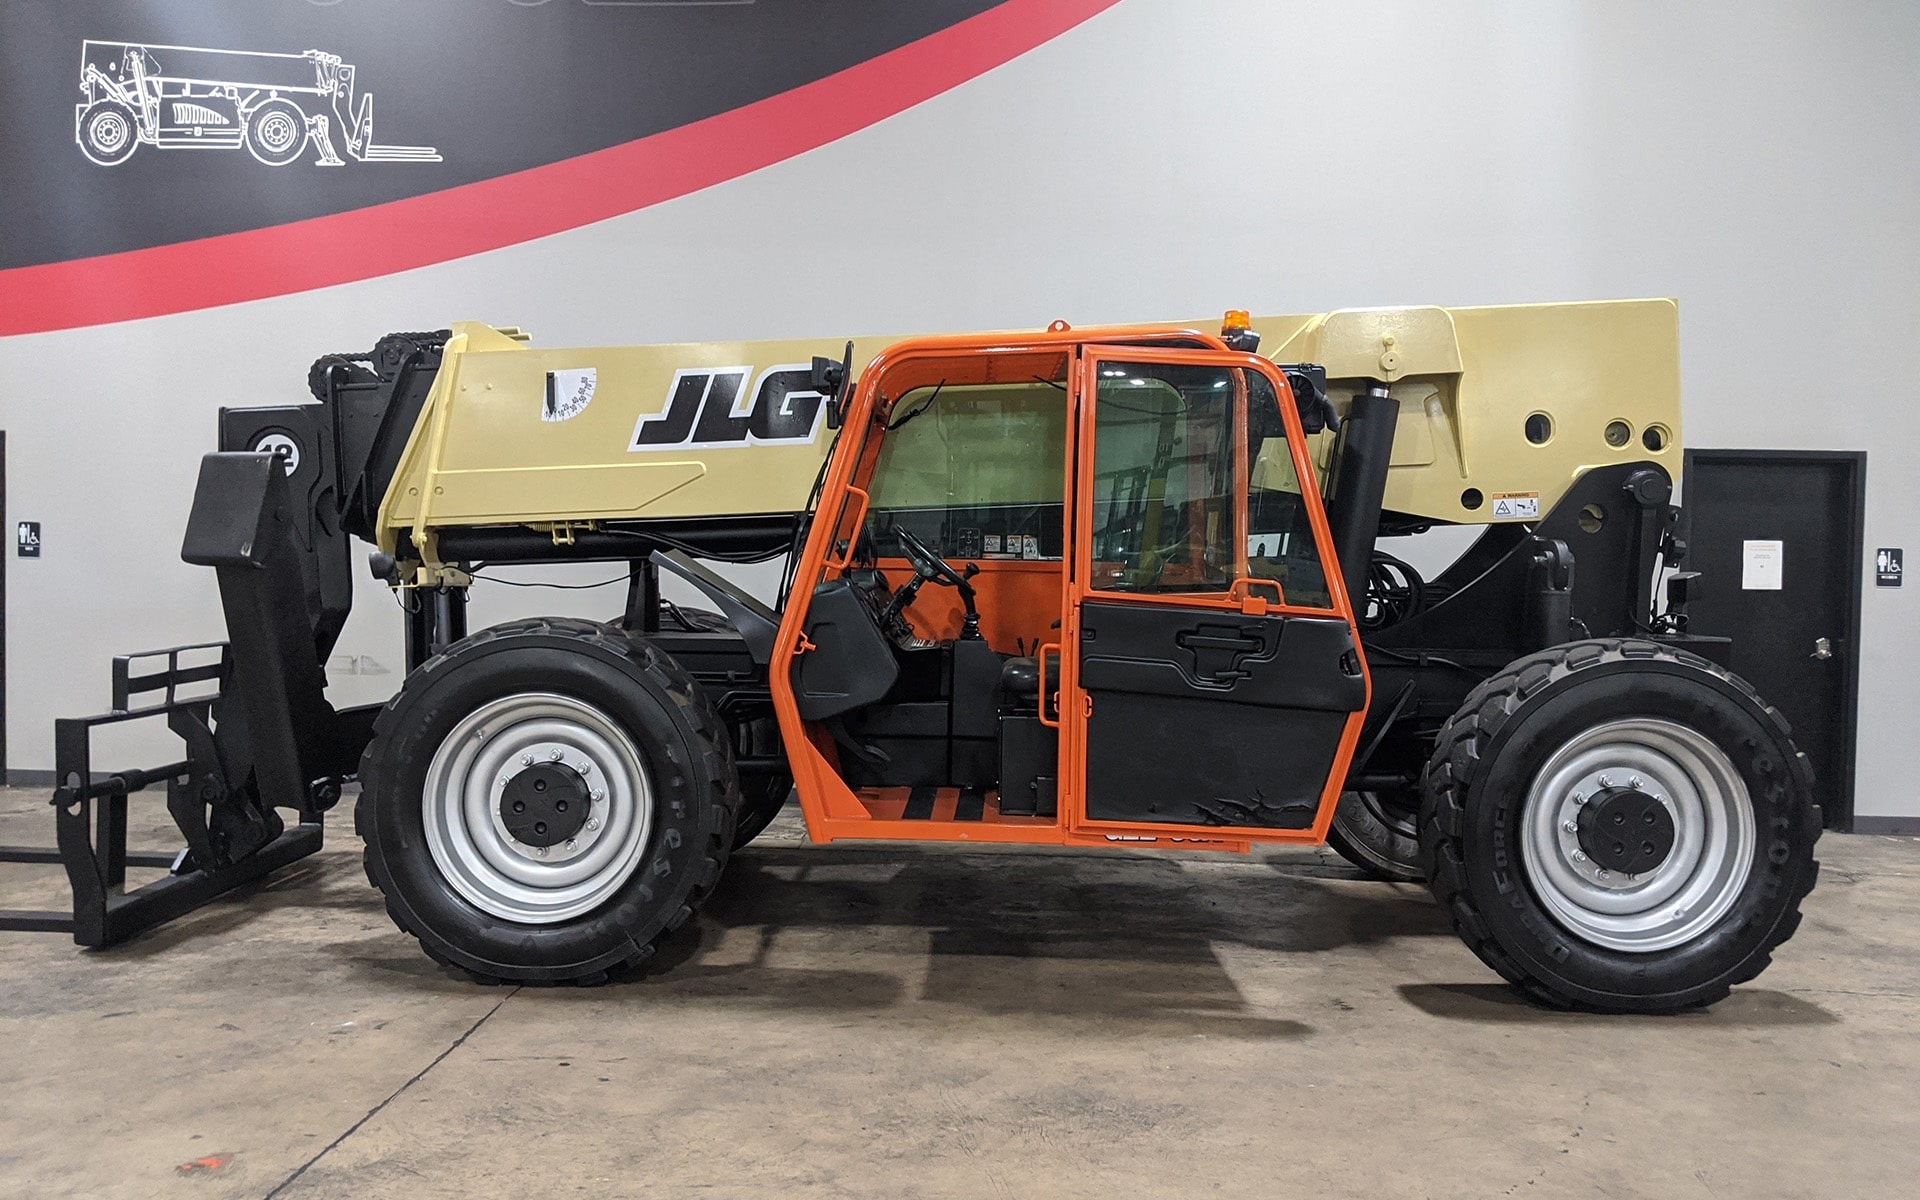 Used 2013 JLG G12-55A  | Cary, IL